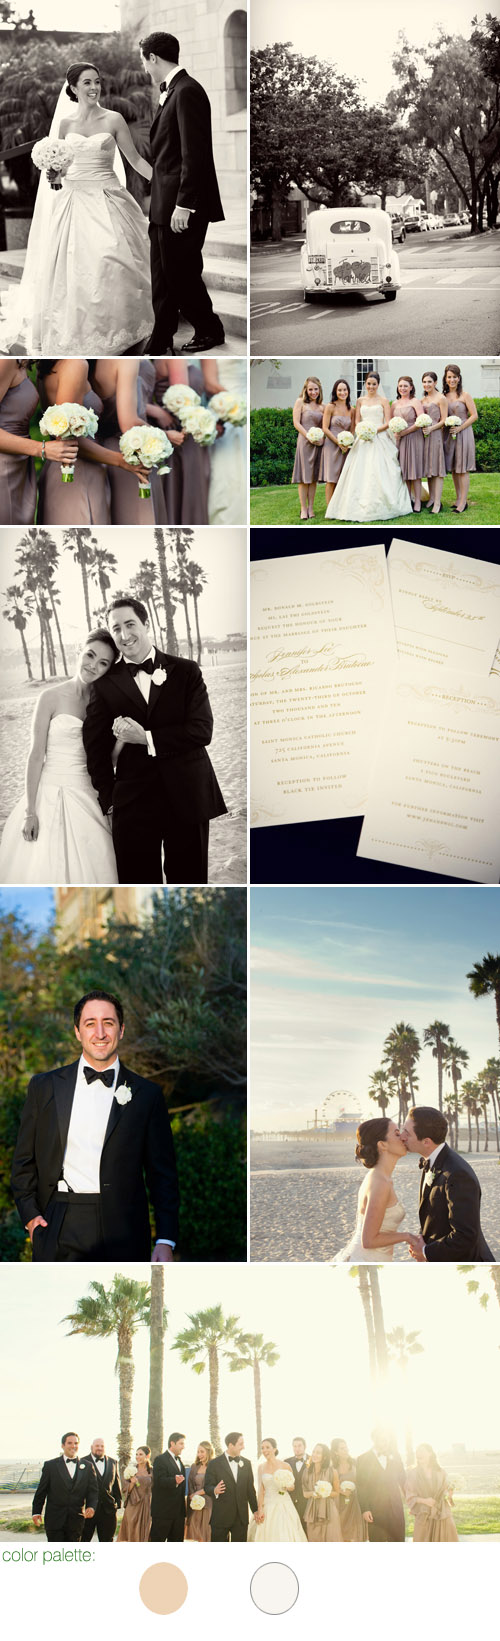 classic and elegant real wedding at Shutters on the Beach in Santa Monica, California, photography by Boutwell Studio